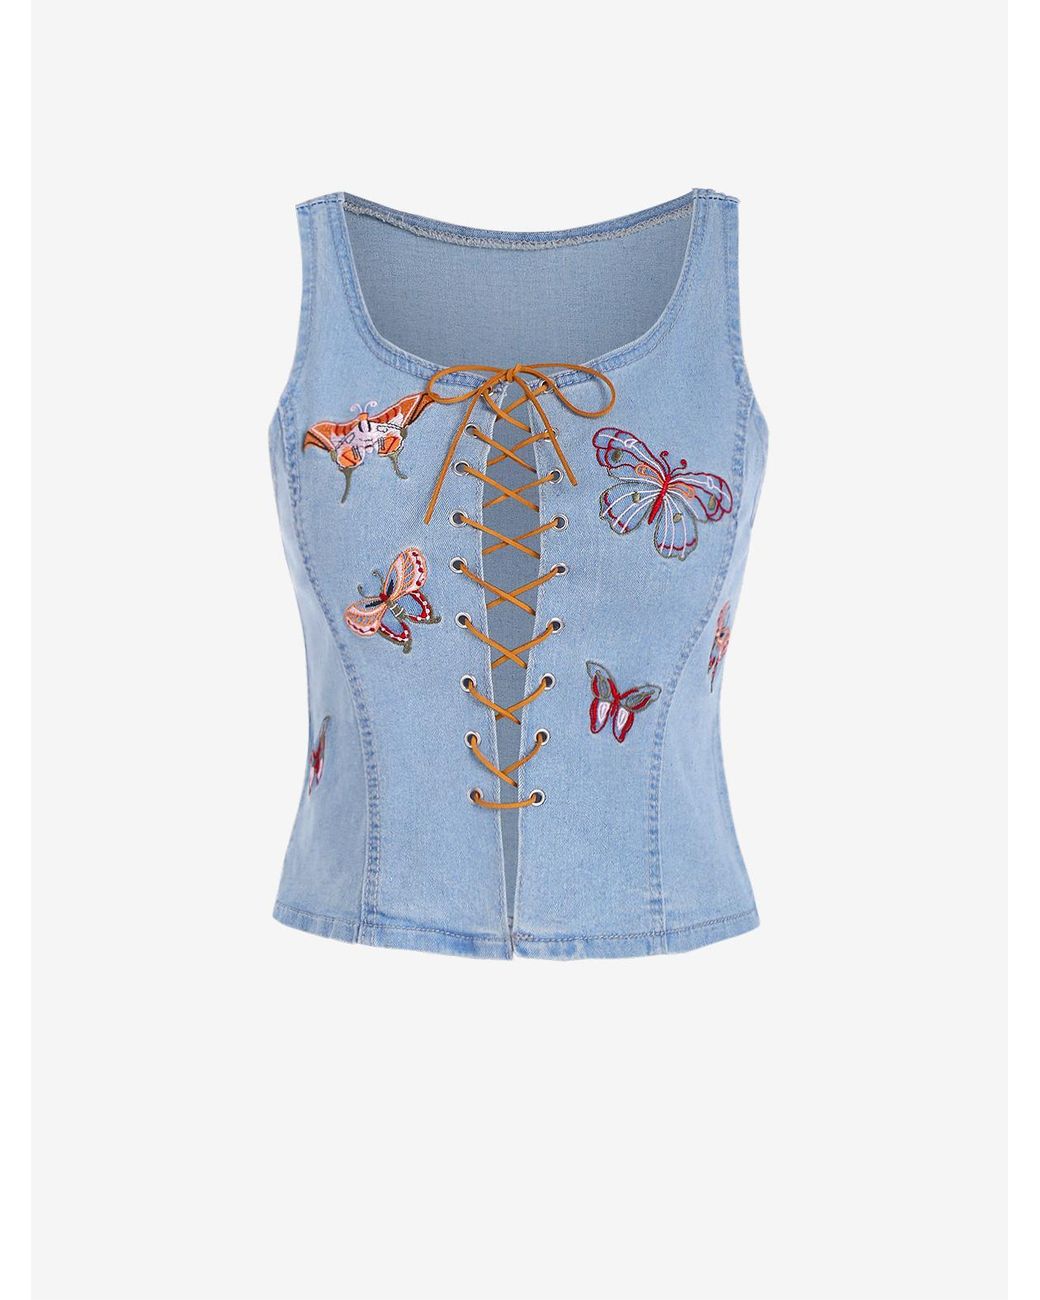 Zaful Tank Tops Lace Up Butterfly Embroidered Denim Tank Top in Blue | Lyst  UK